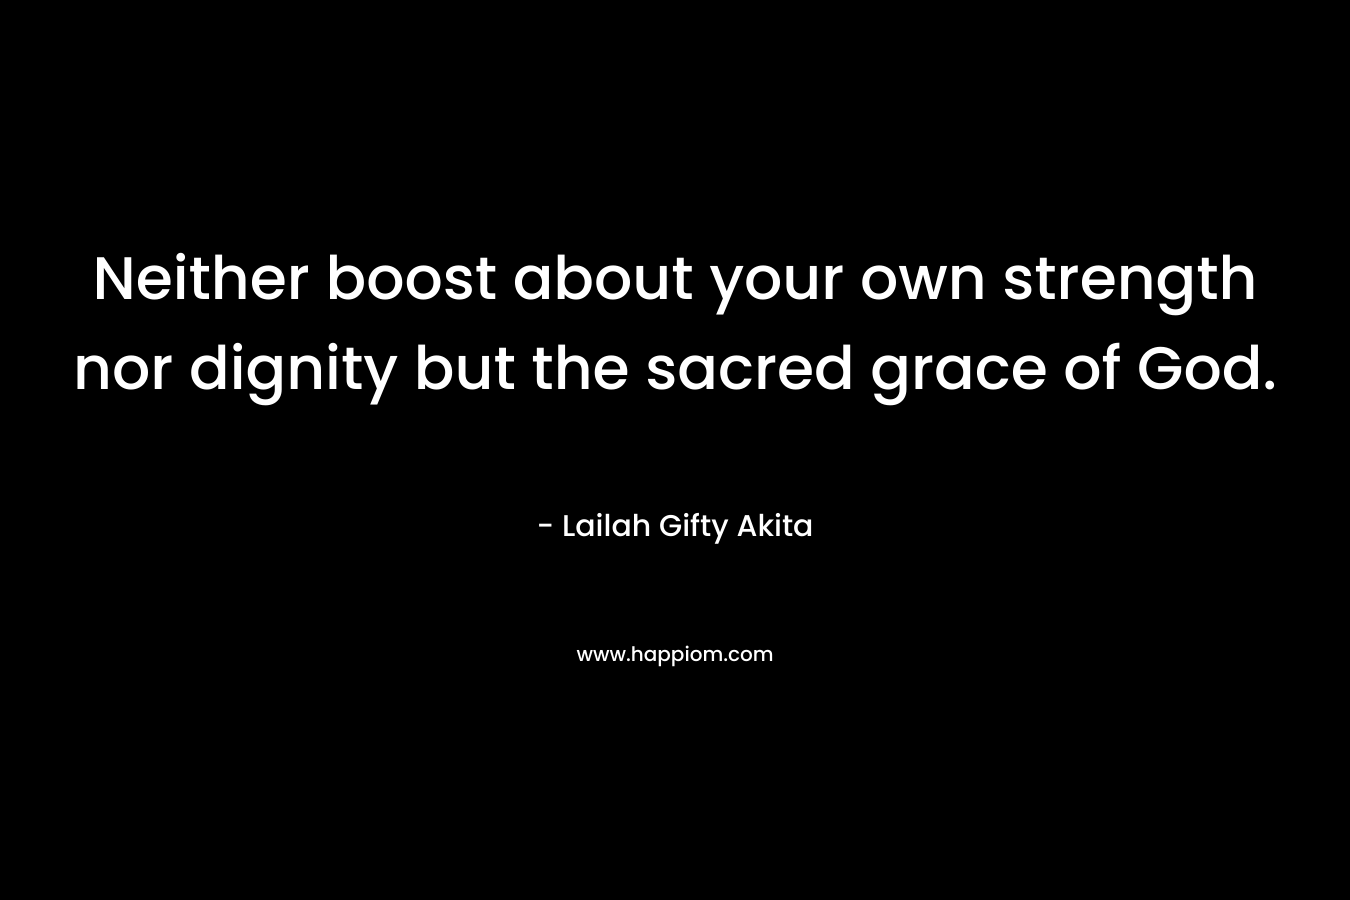 Neither boost about your own strength nor dignity but the sacred grace of God.